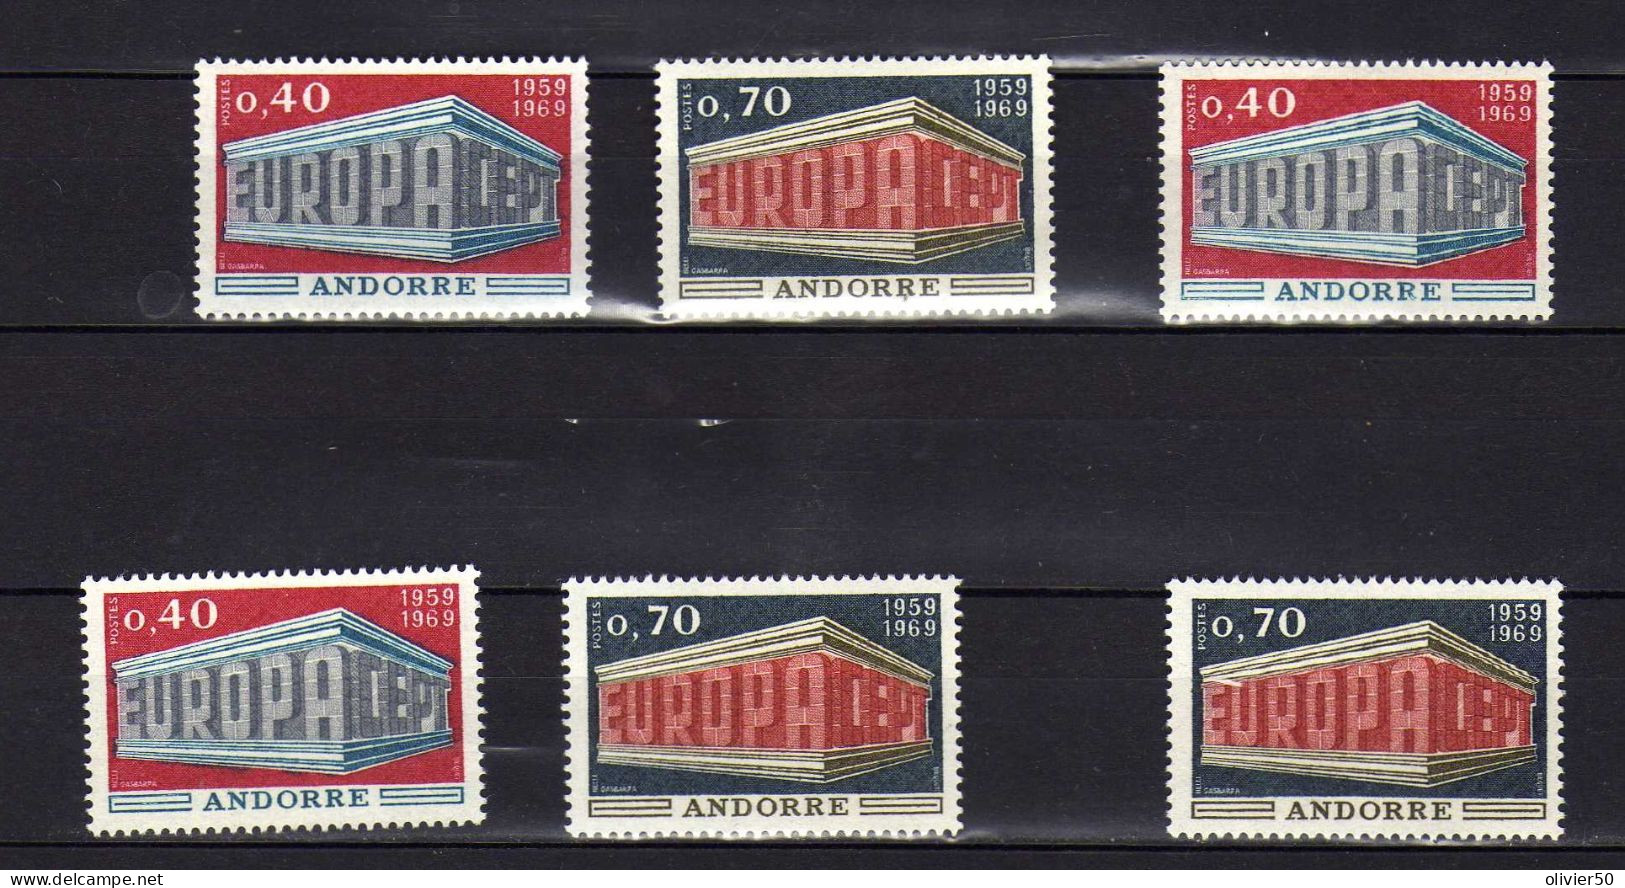 Andorre Francaise - 1969- Europa -  -  Neufs** - MNH - Unused Stamps